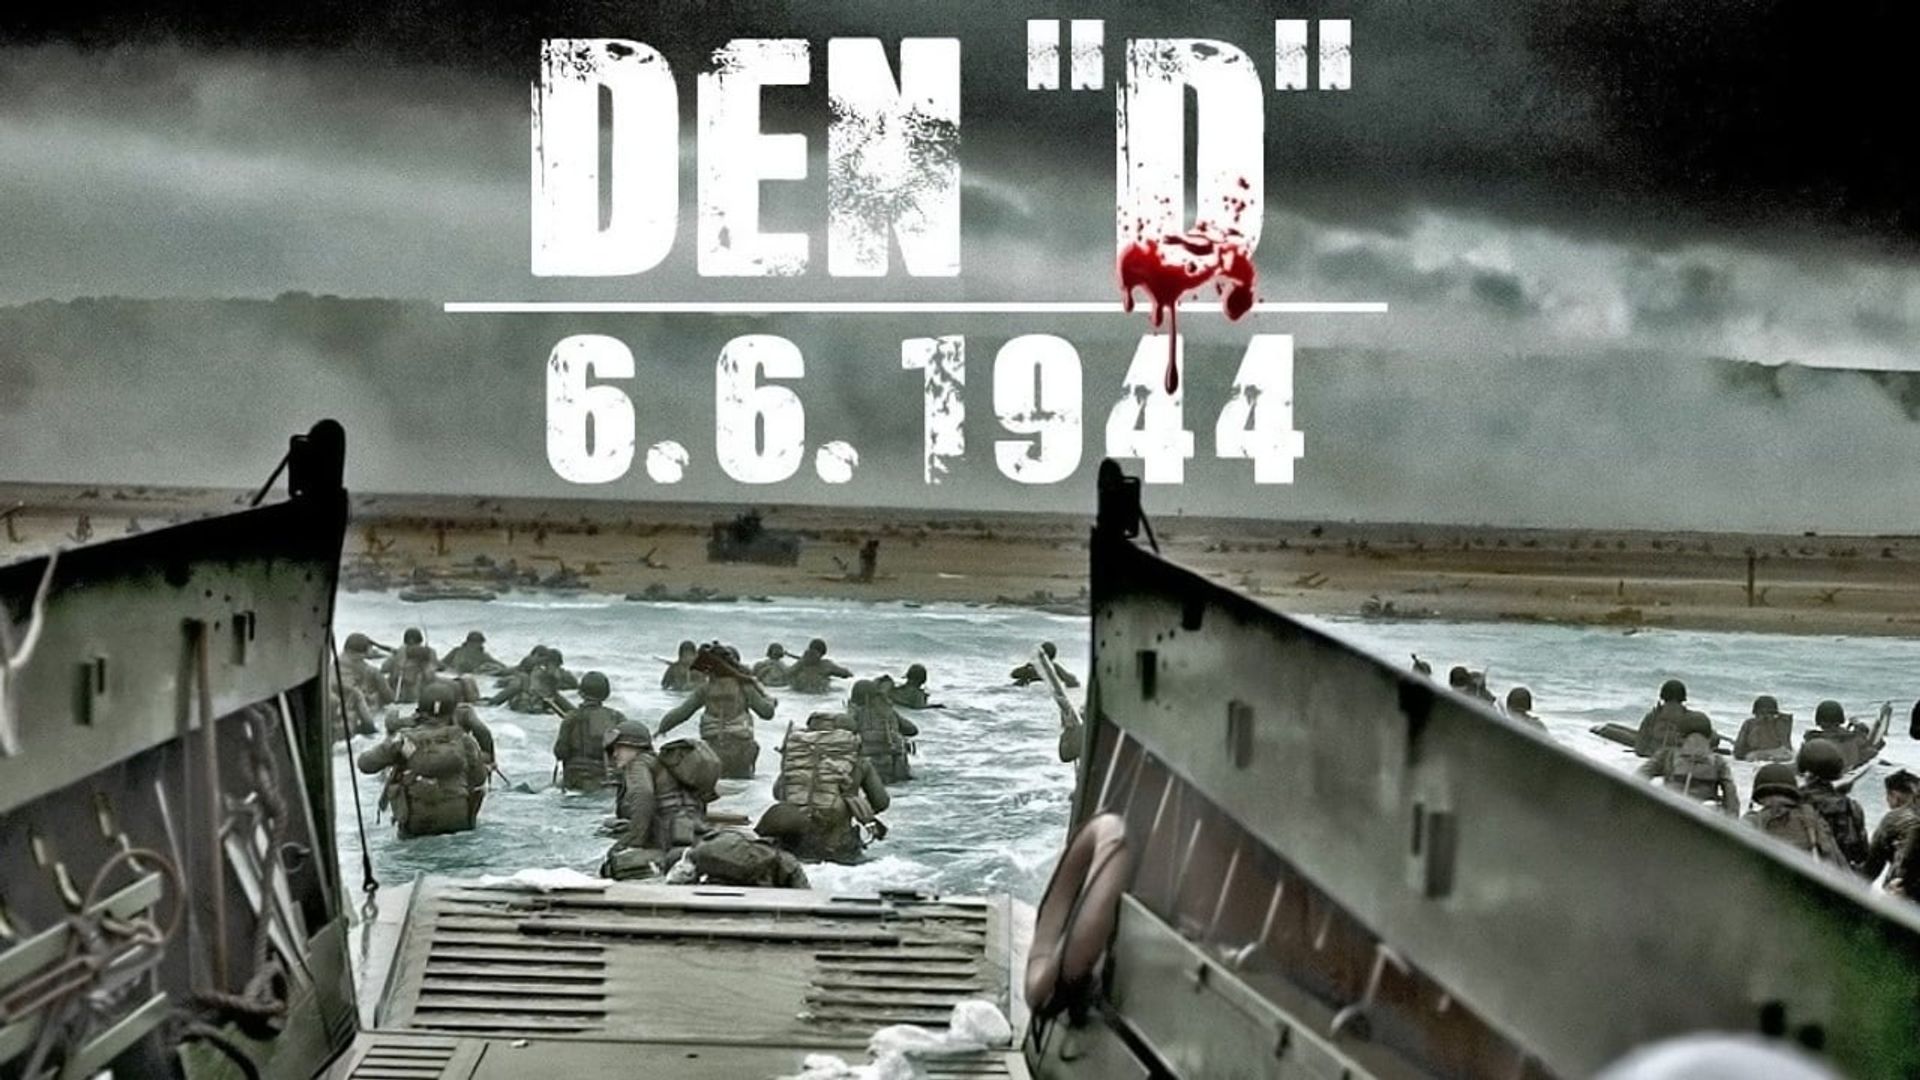 D-Day 6.6.1944 background